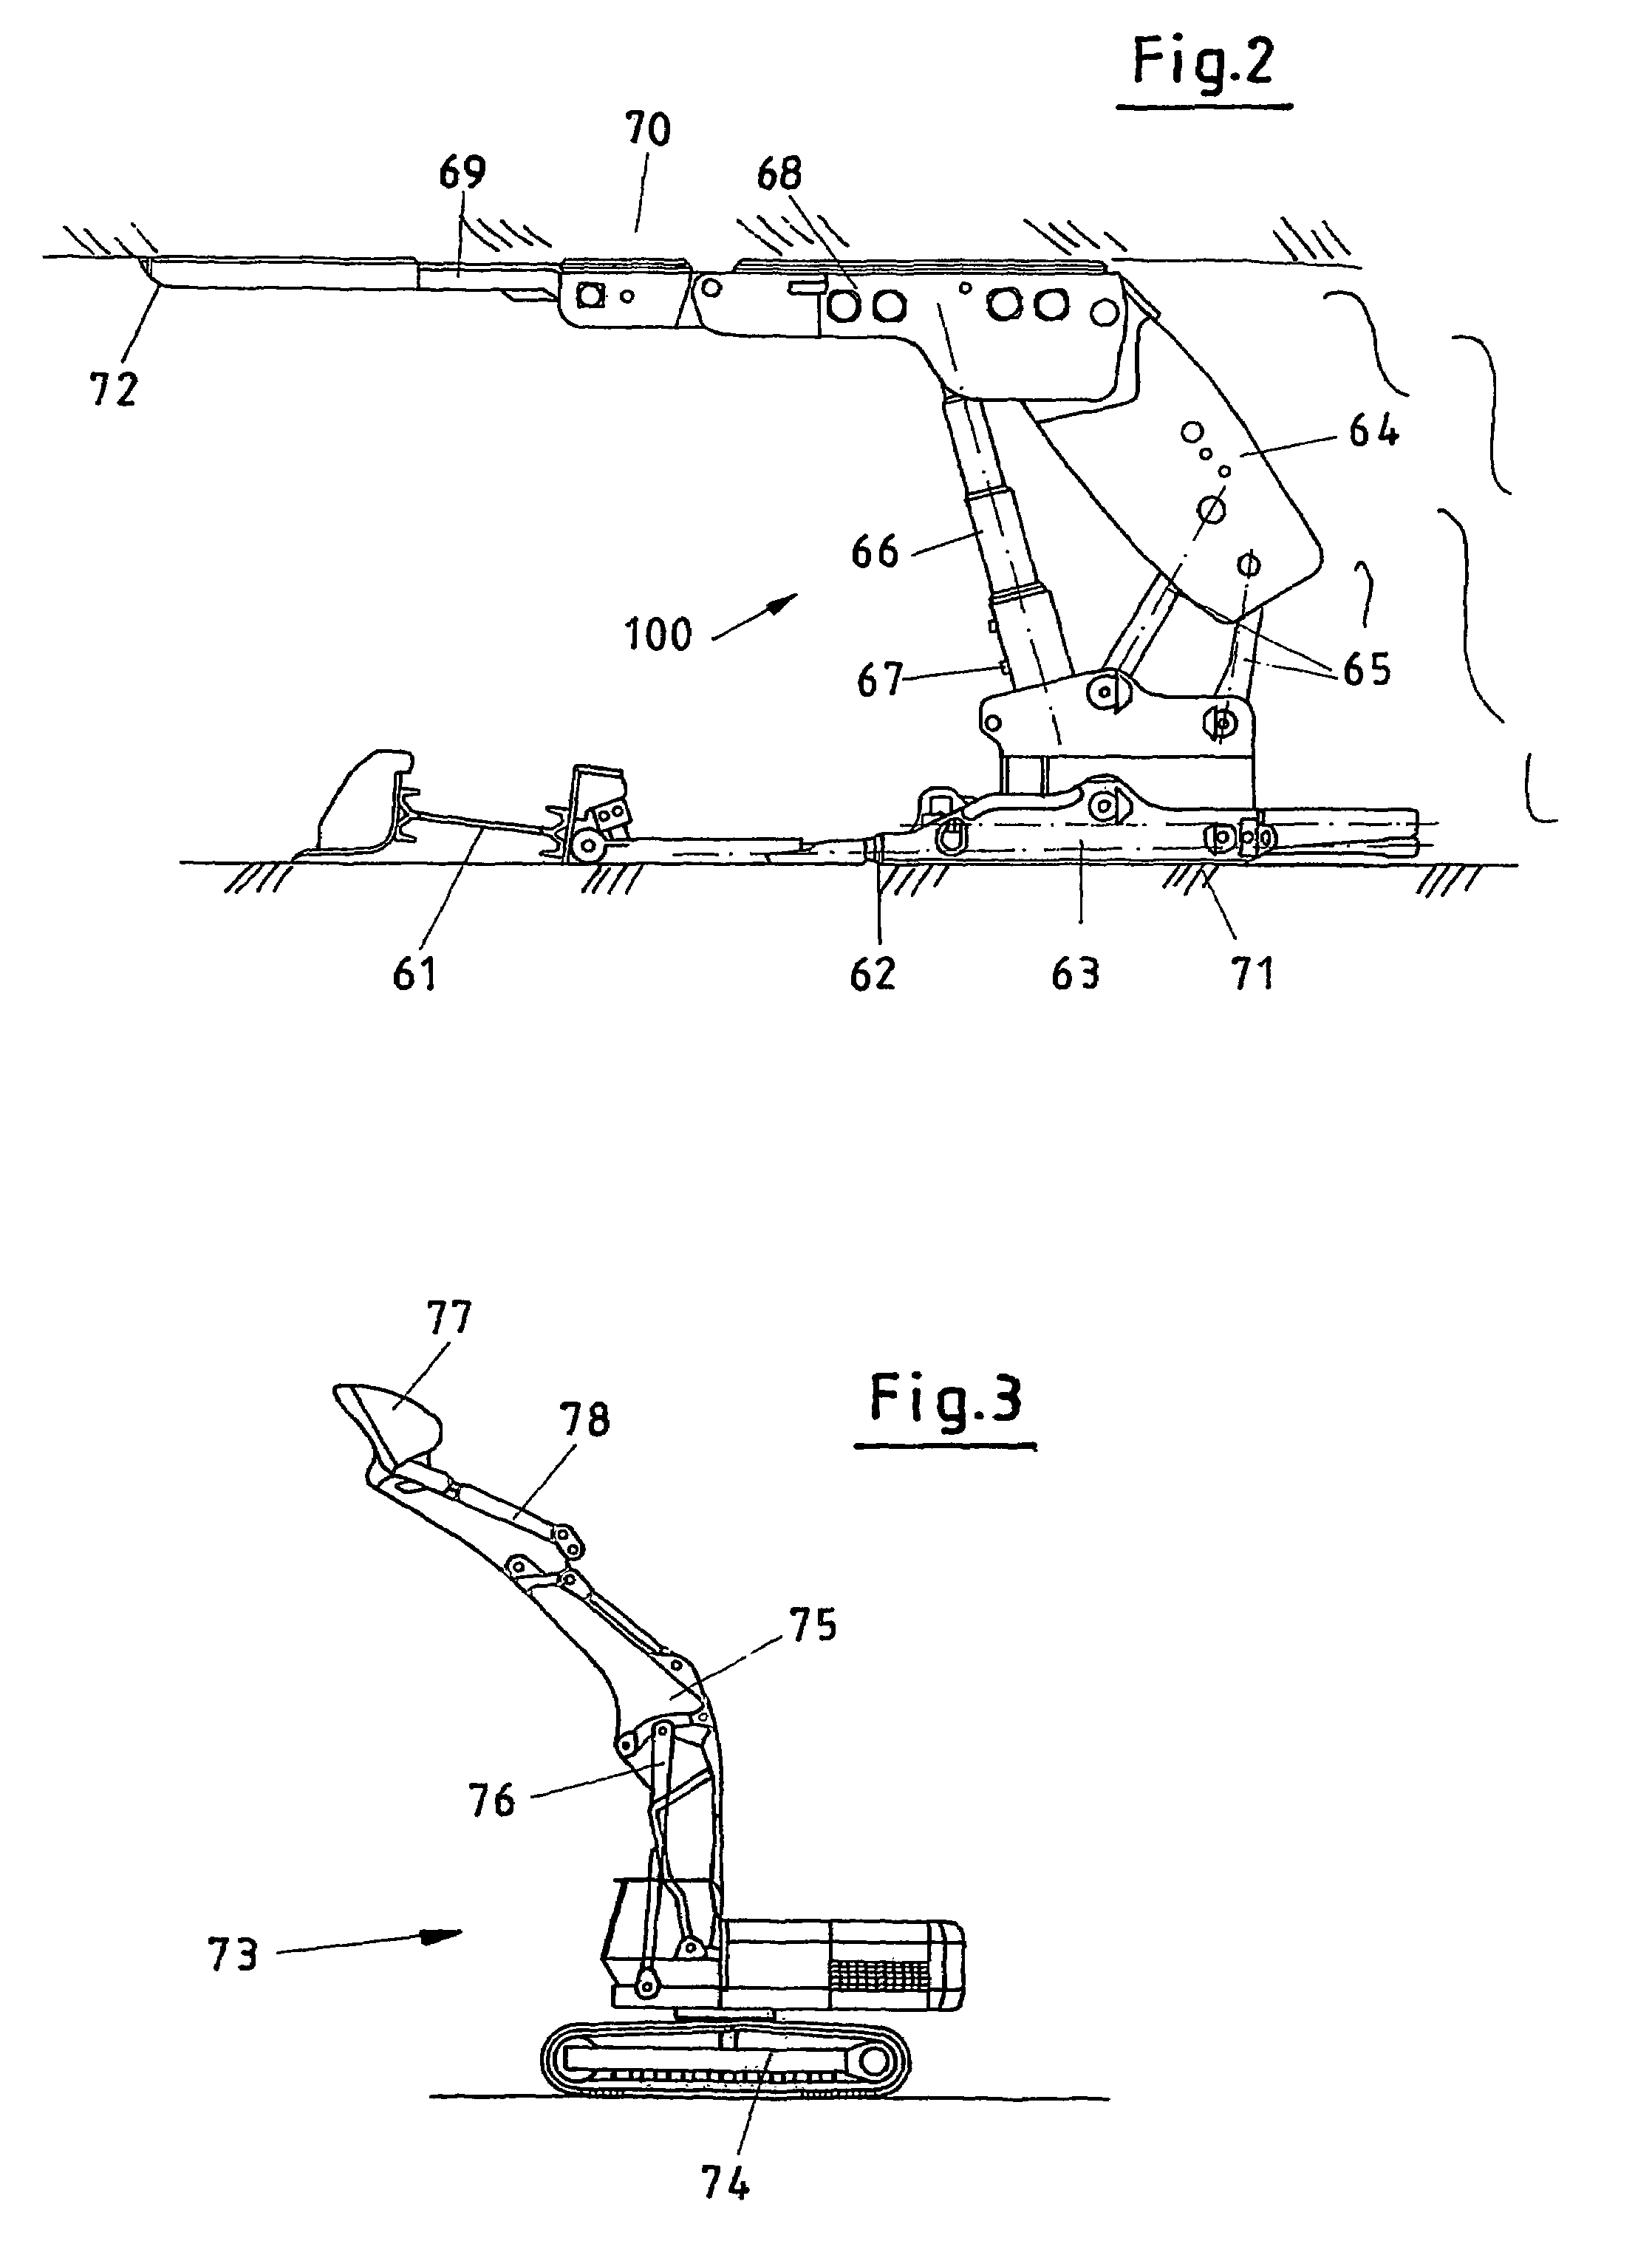 Method and device for pressure amplification in cylinders, in particular hydraulic rams